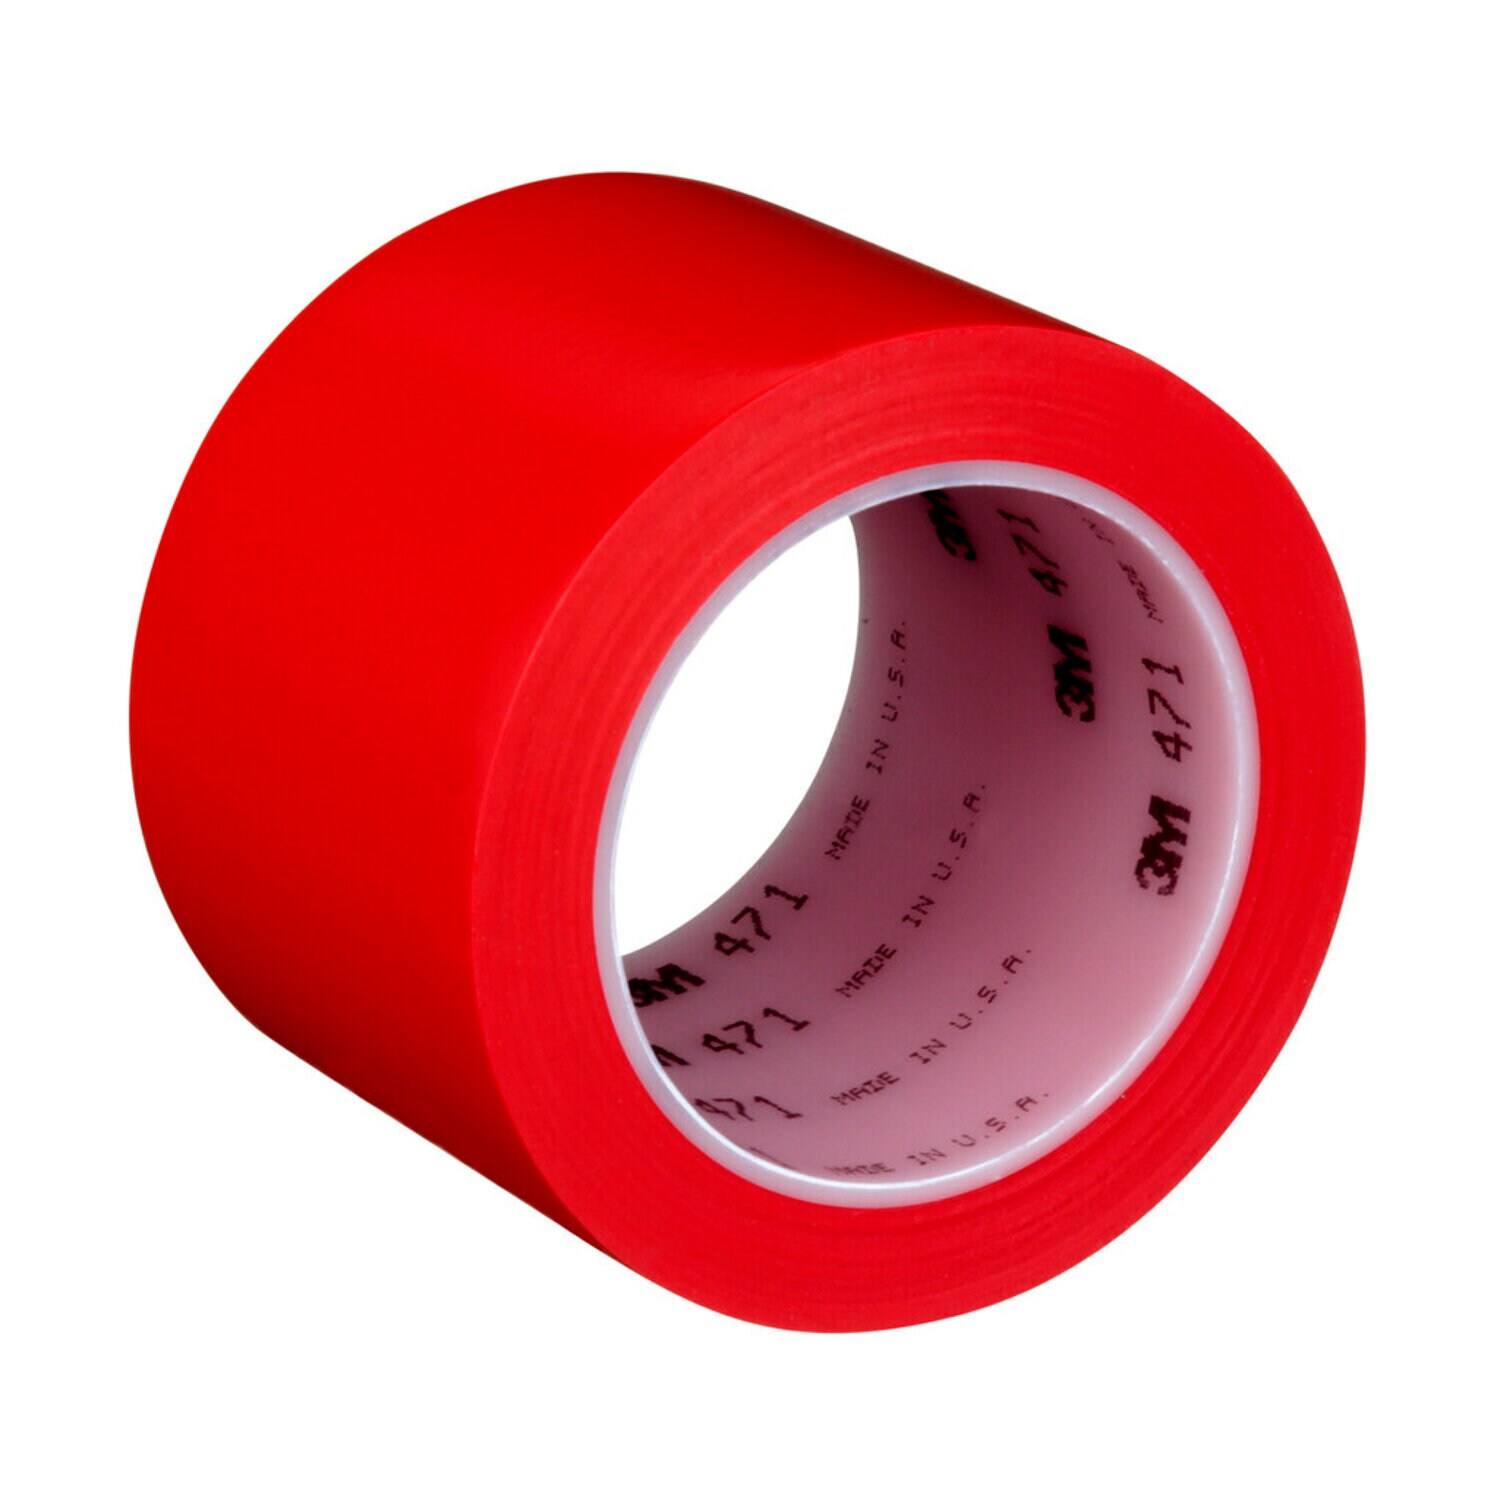 7100064525 - 3M Vinyl Tape 471, Red, 3 in x 36 yd, 5.2 mil, 12 rolls per case,
Individually Wrapped Conveniently Packaged